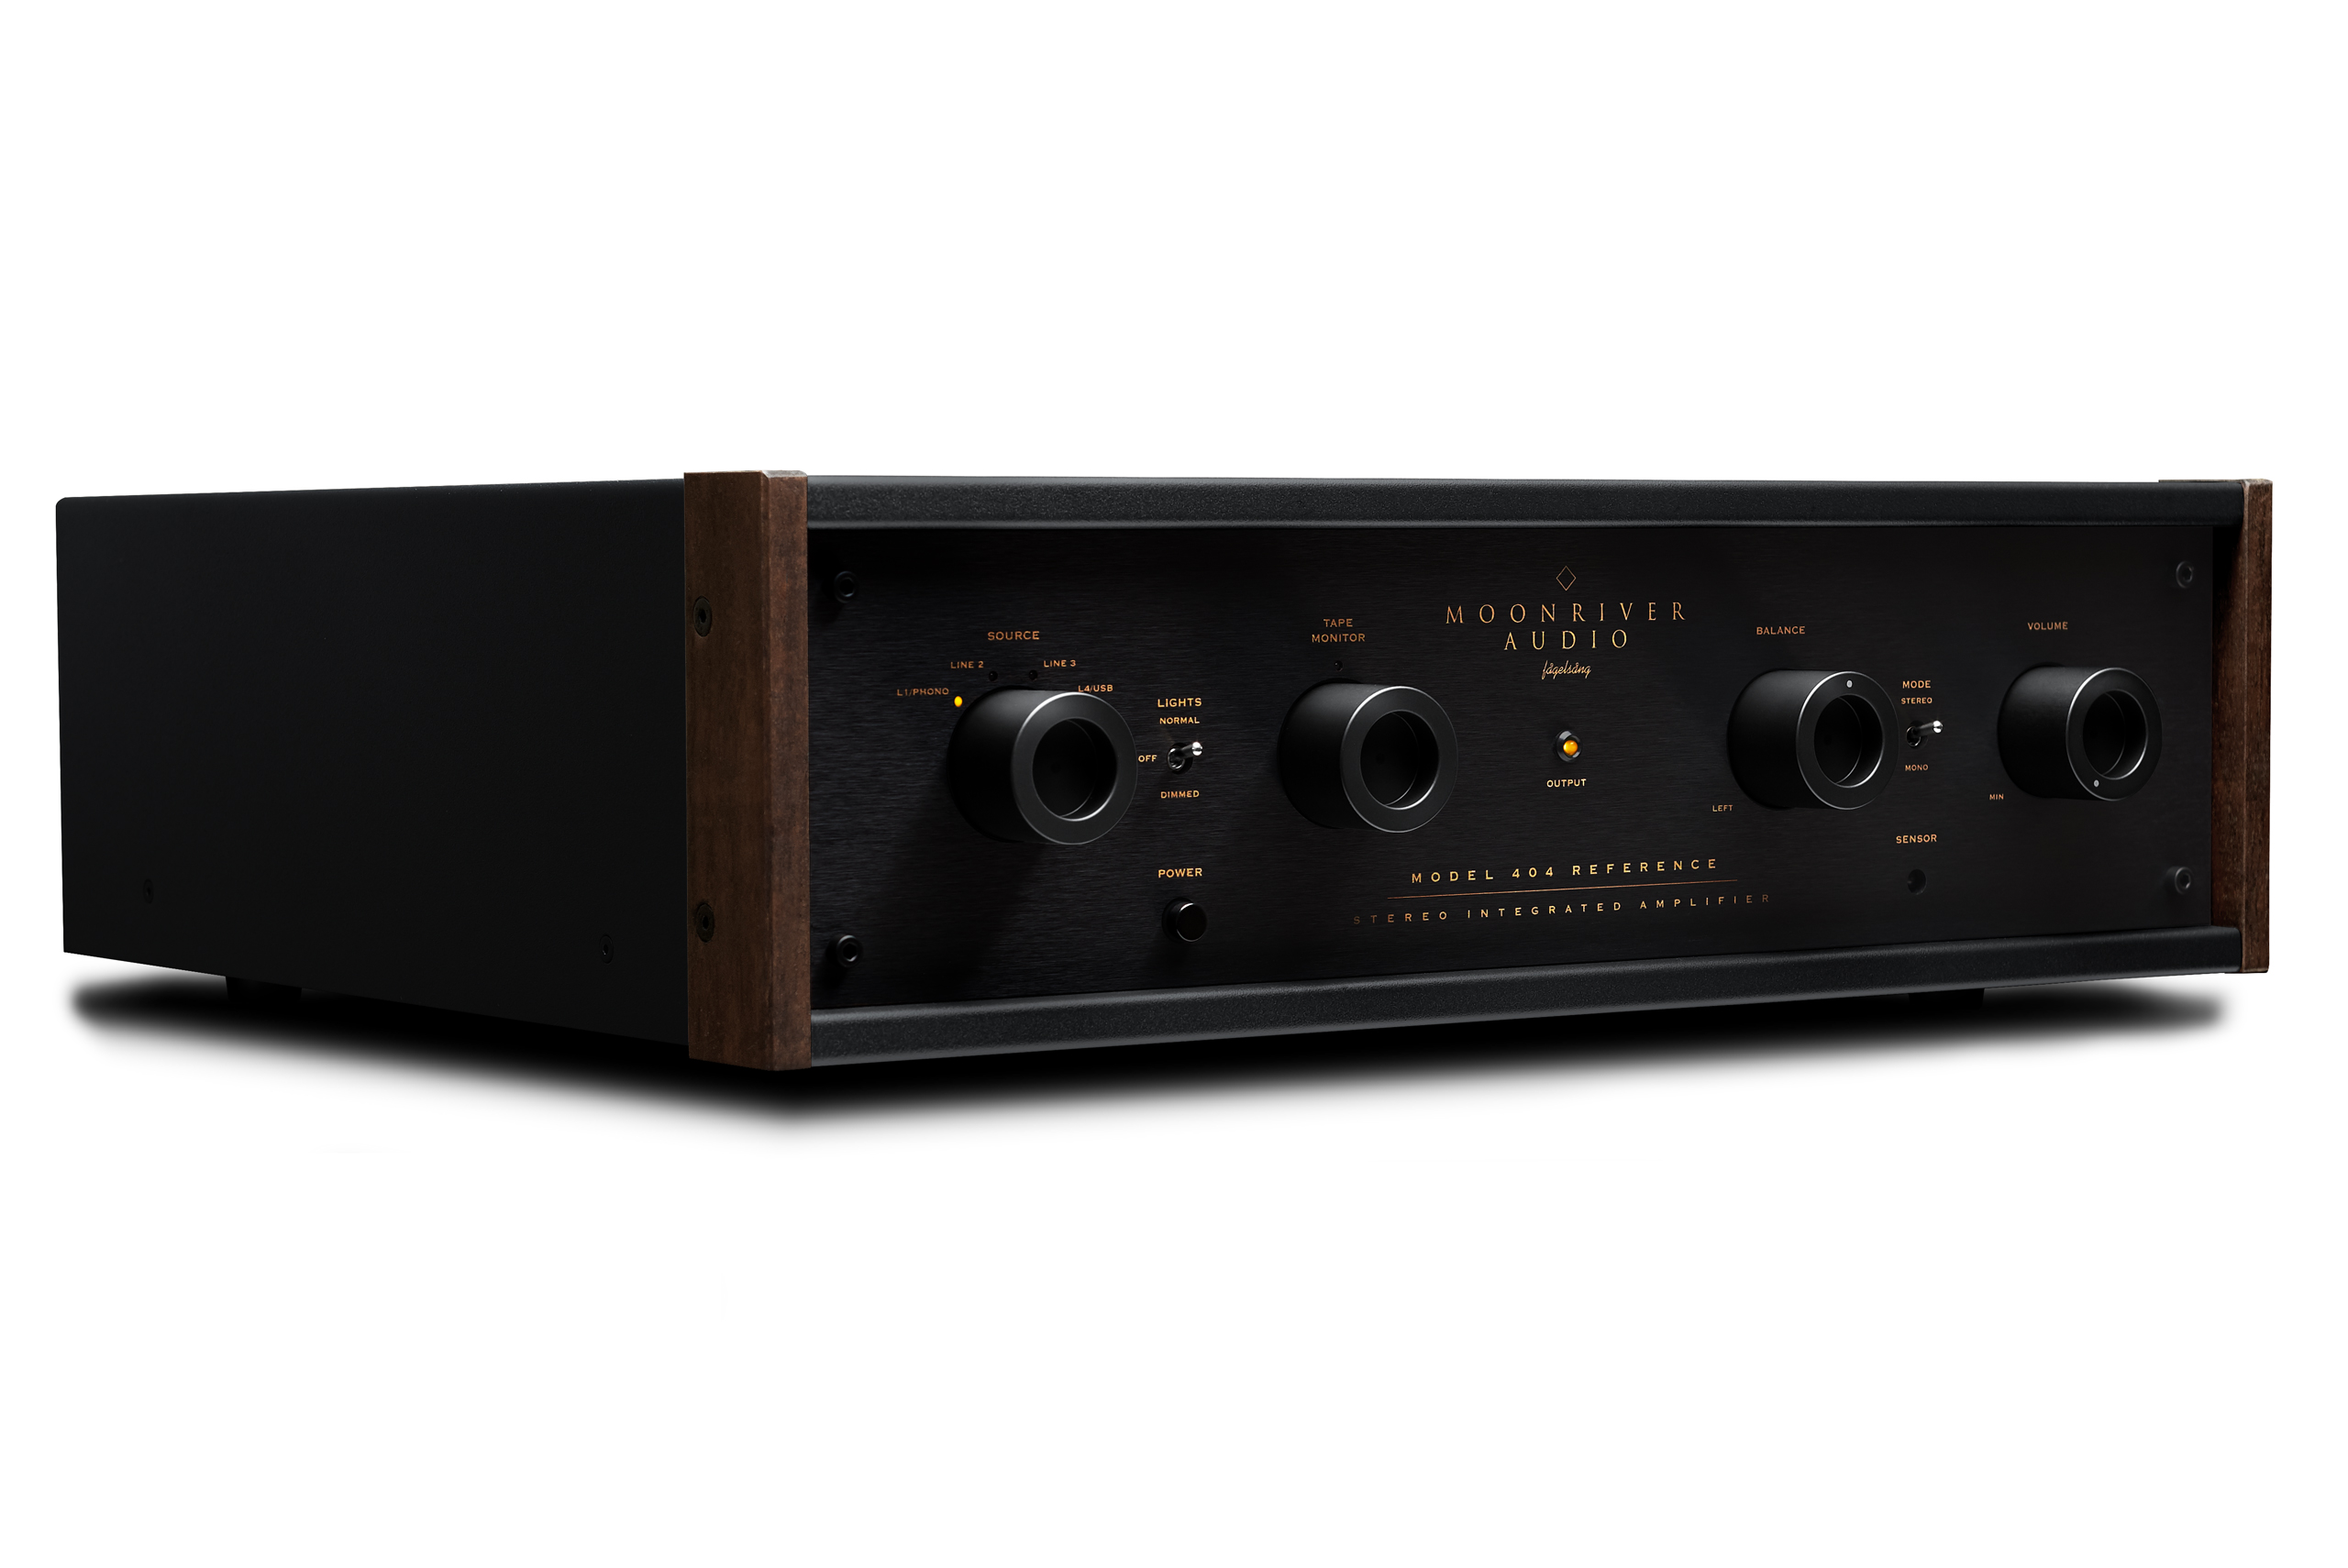 Moonriver Audio The 404 Reference integrated amplifier